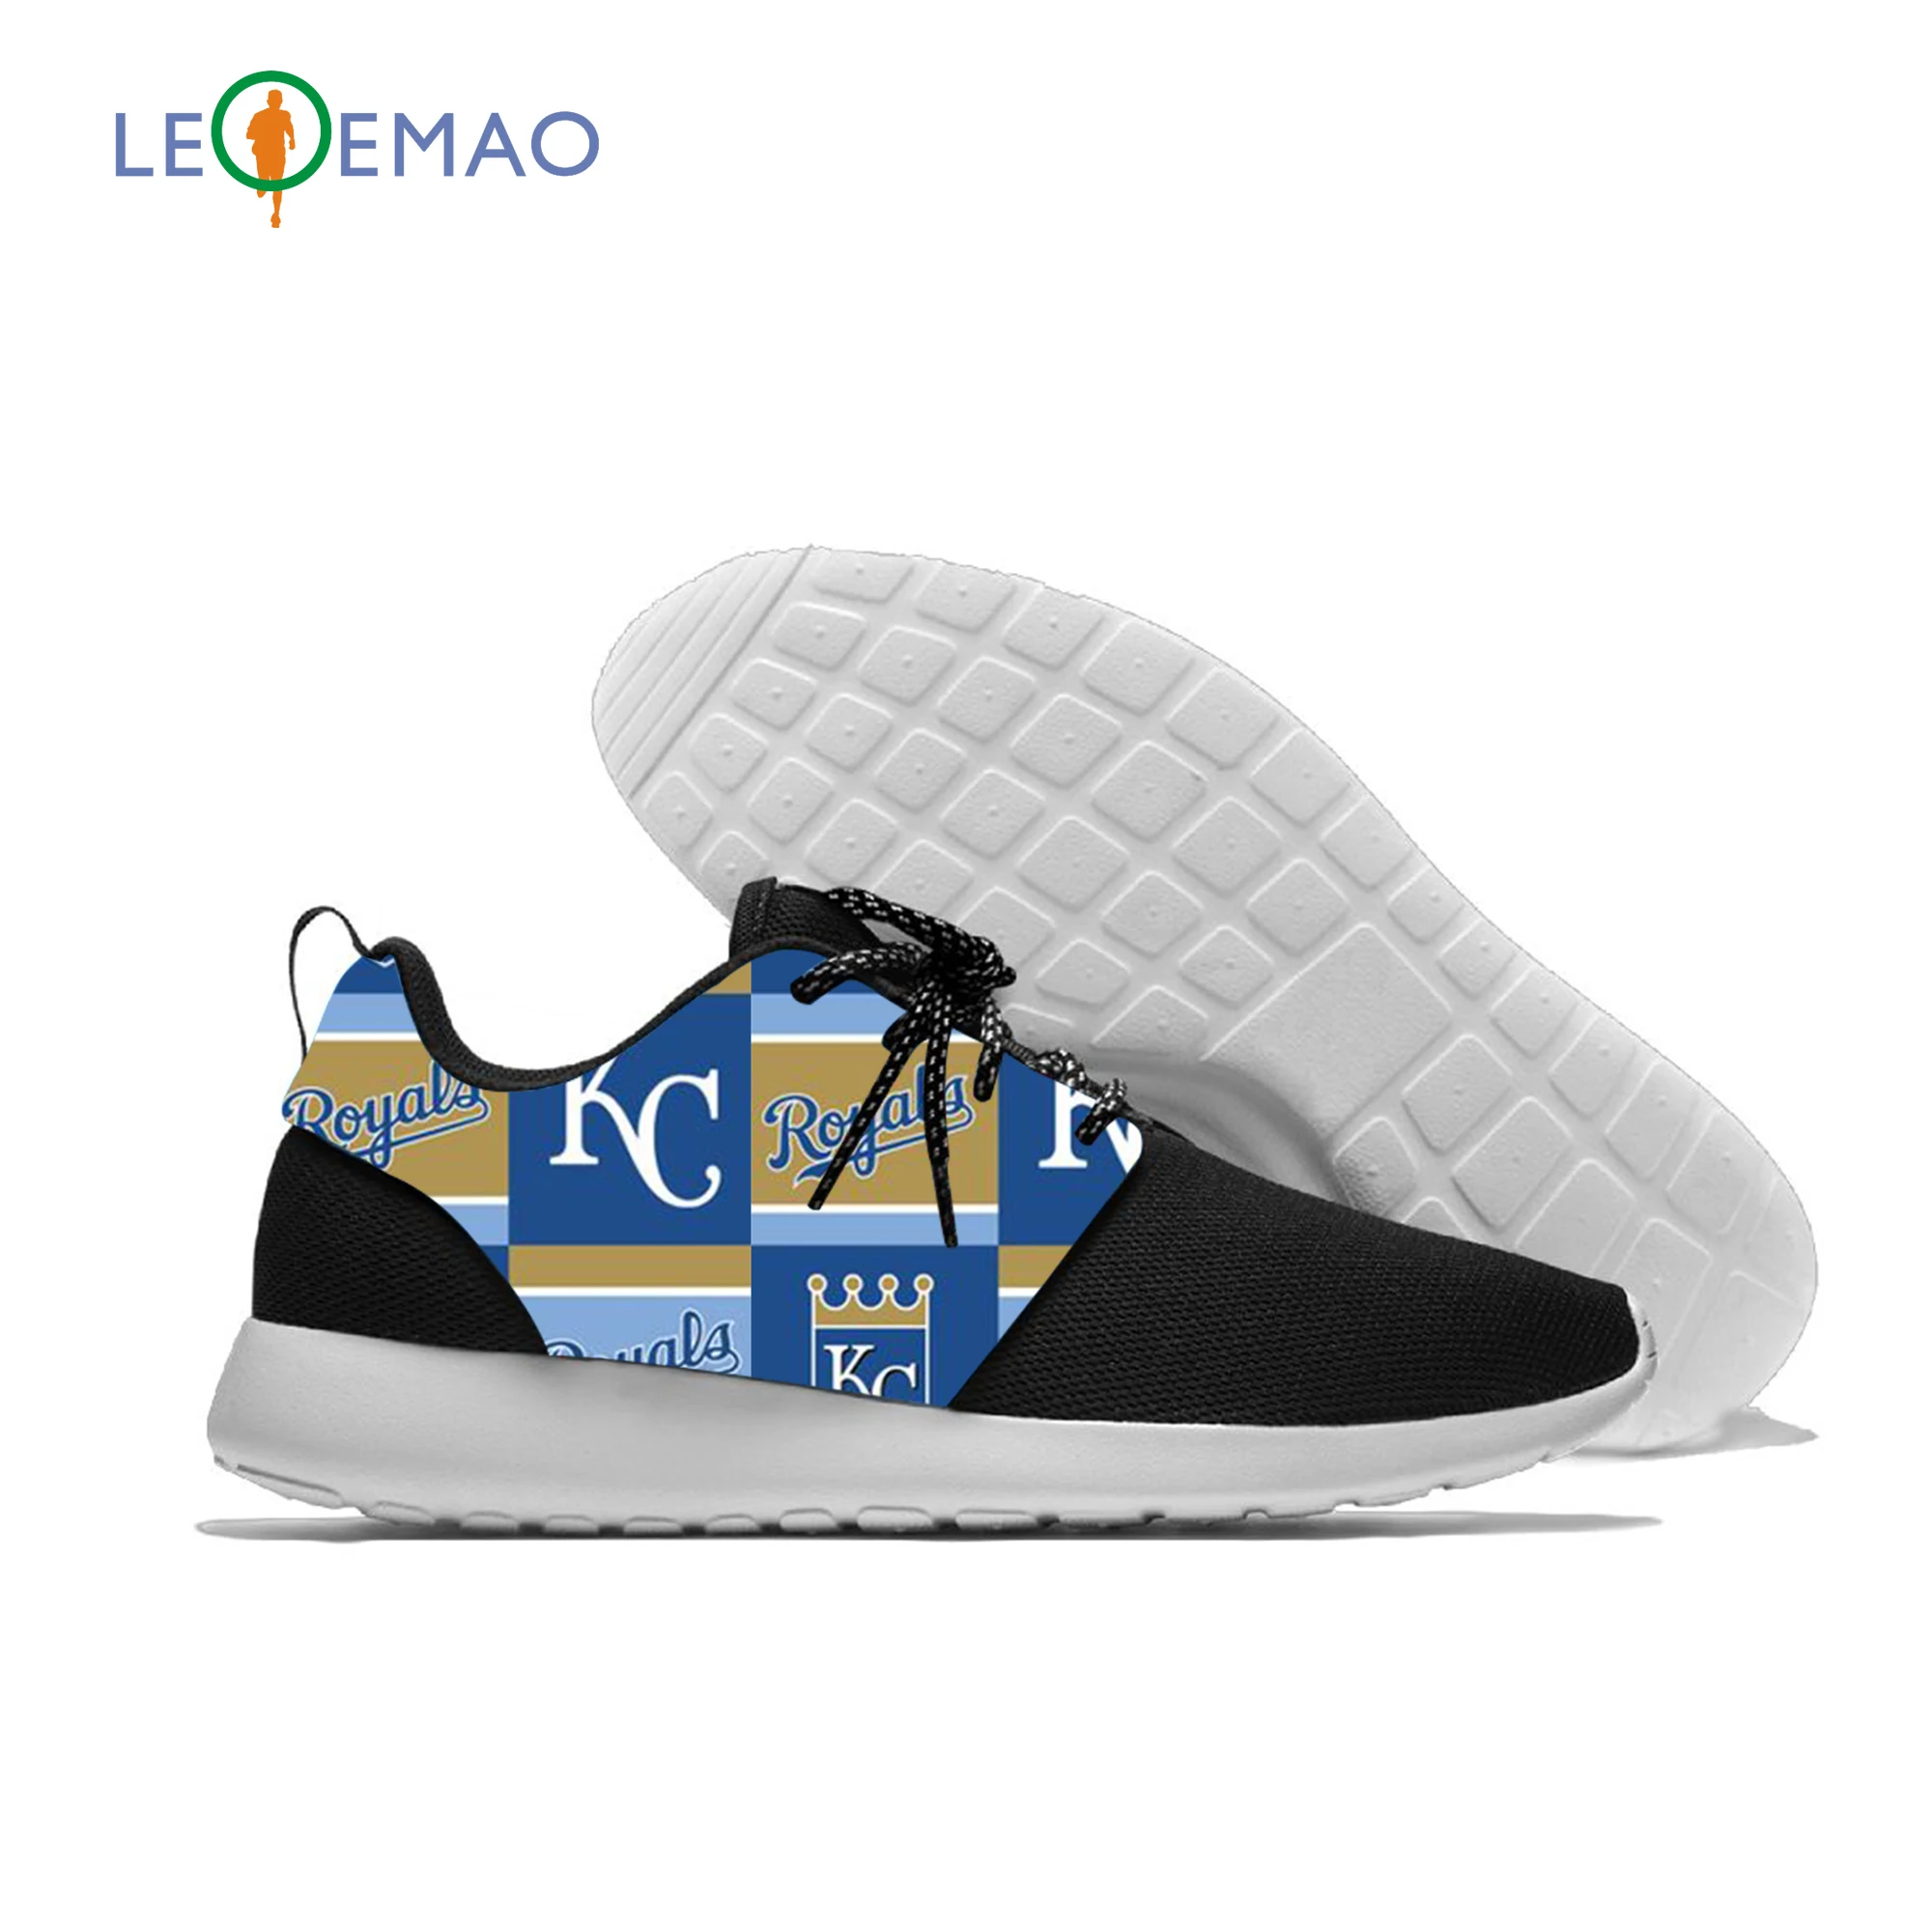 

2020 Hot Fashion Printing Royals Sneakers Unisex Lightweight Kansas City Baseball Team Fans Casual Shoes